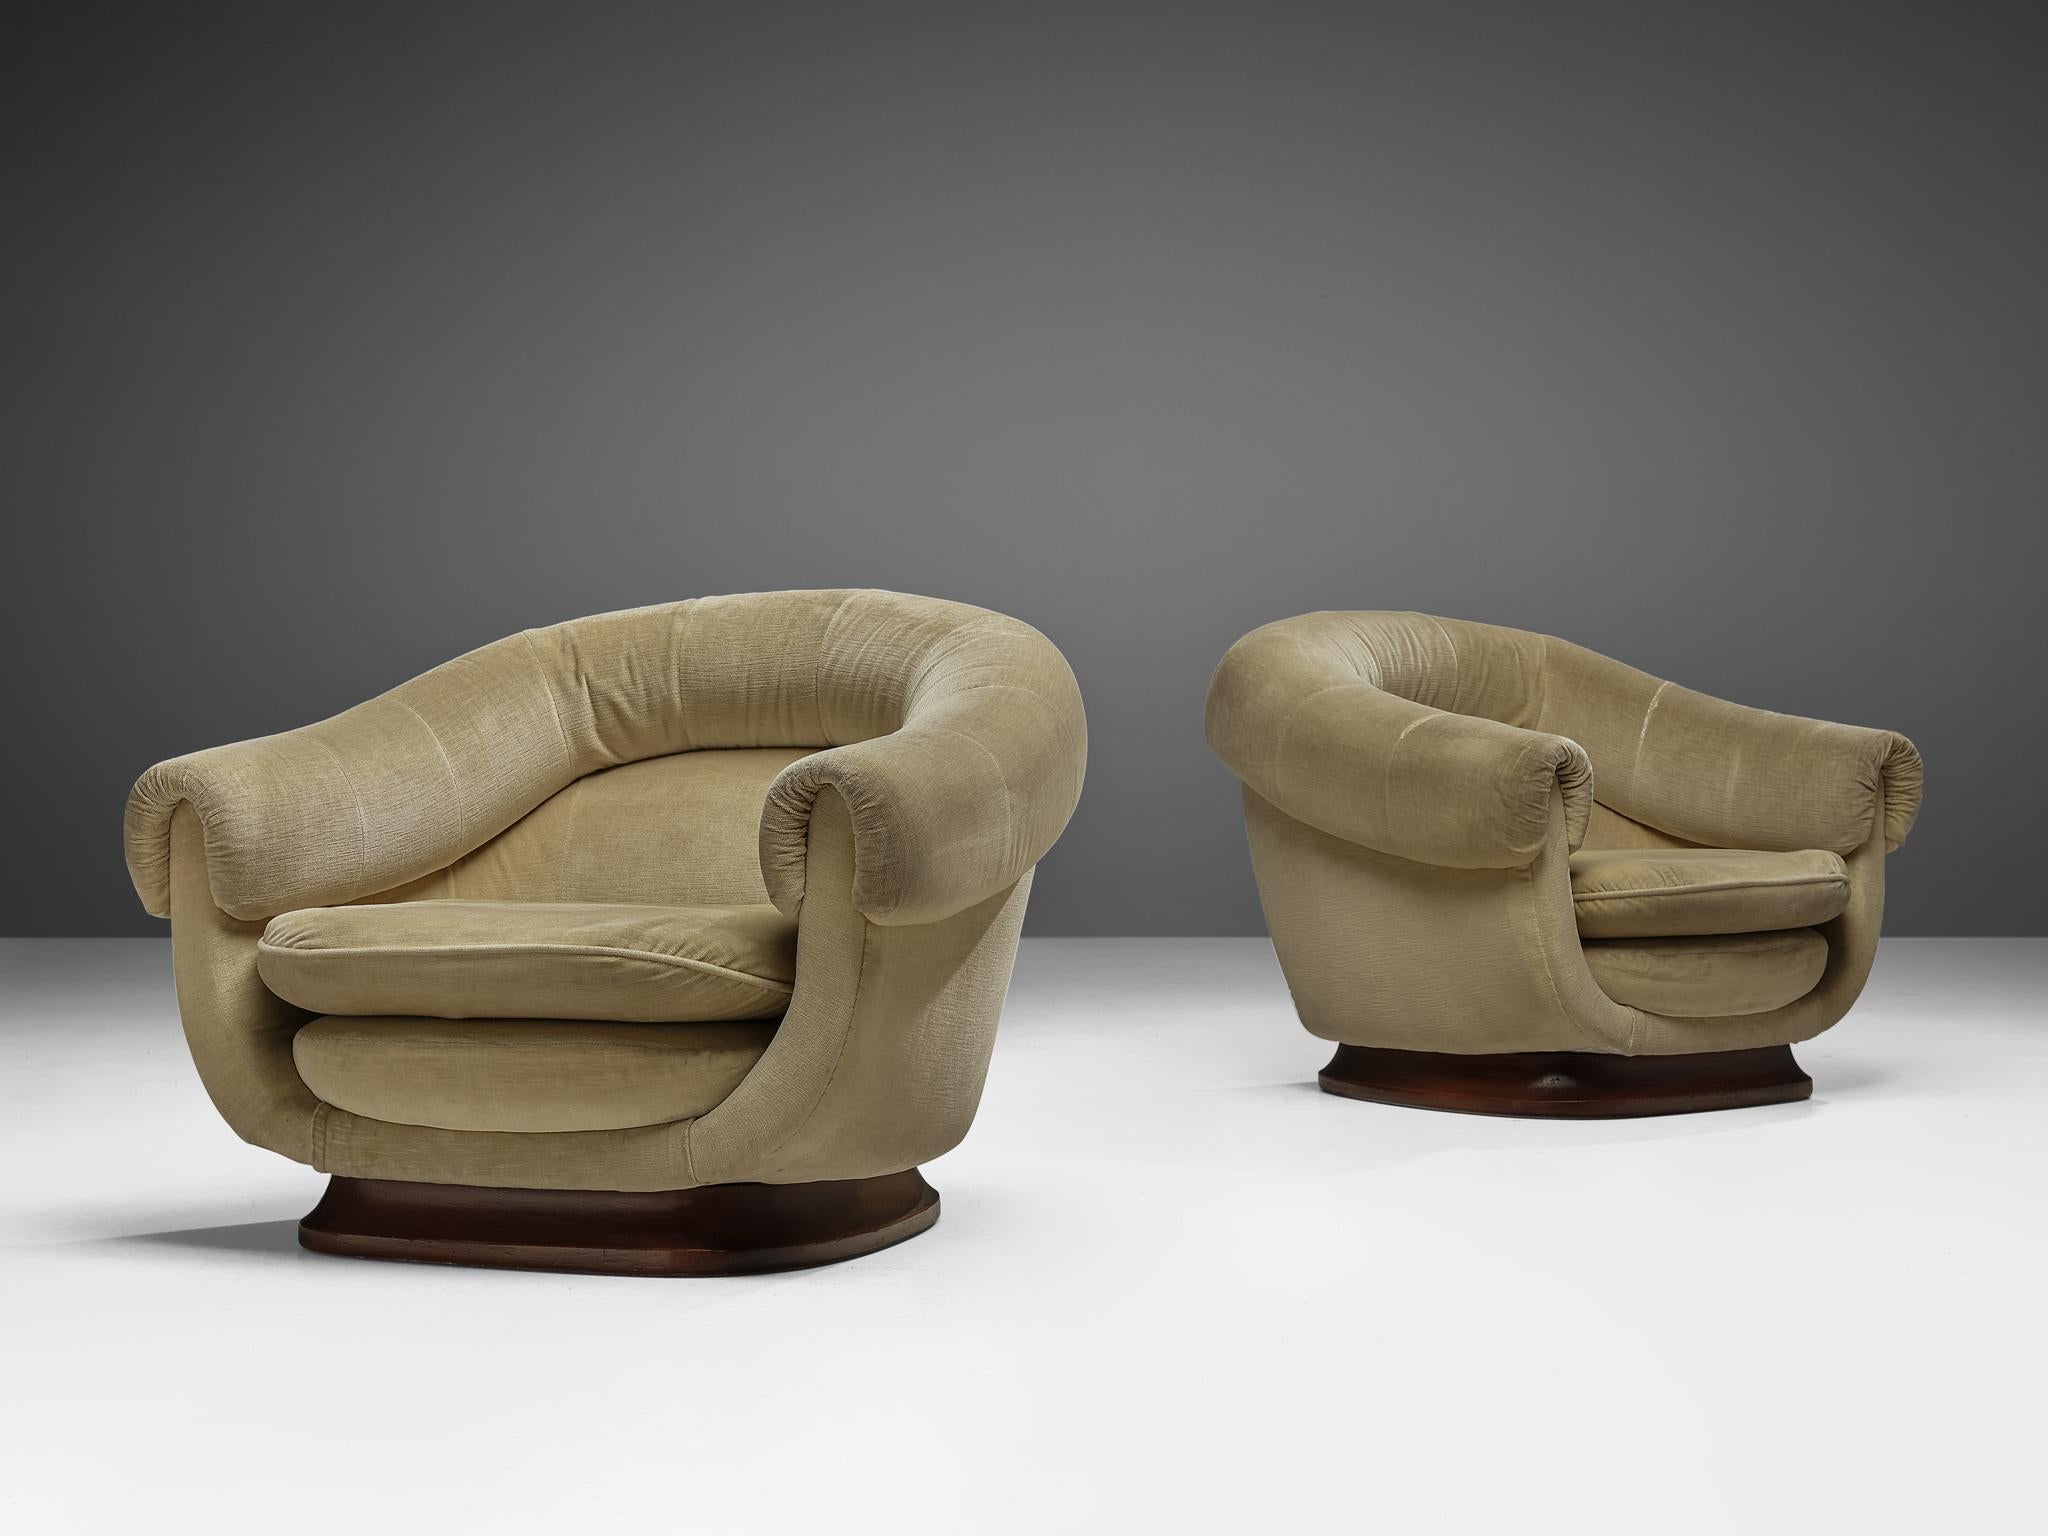 Pair of lounge chairs, fabric and wood, Italy, 1950s

An Italian voluptuous and bold set of lounge chairs that show a play of volumes with soft, fluid and rounded lines. These  chairs feature thick and rounded backrests that ascended flow over to